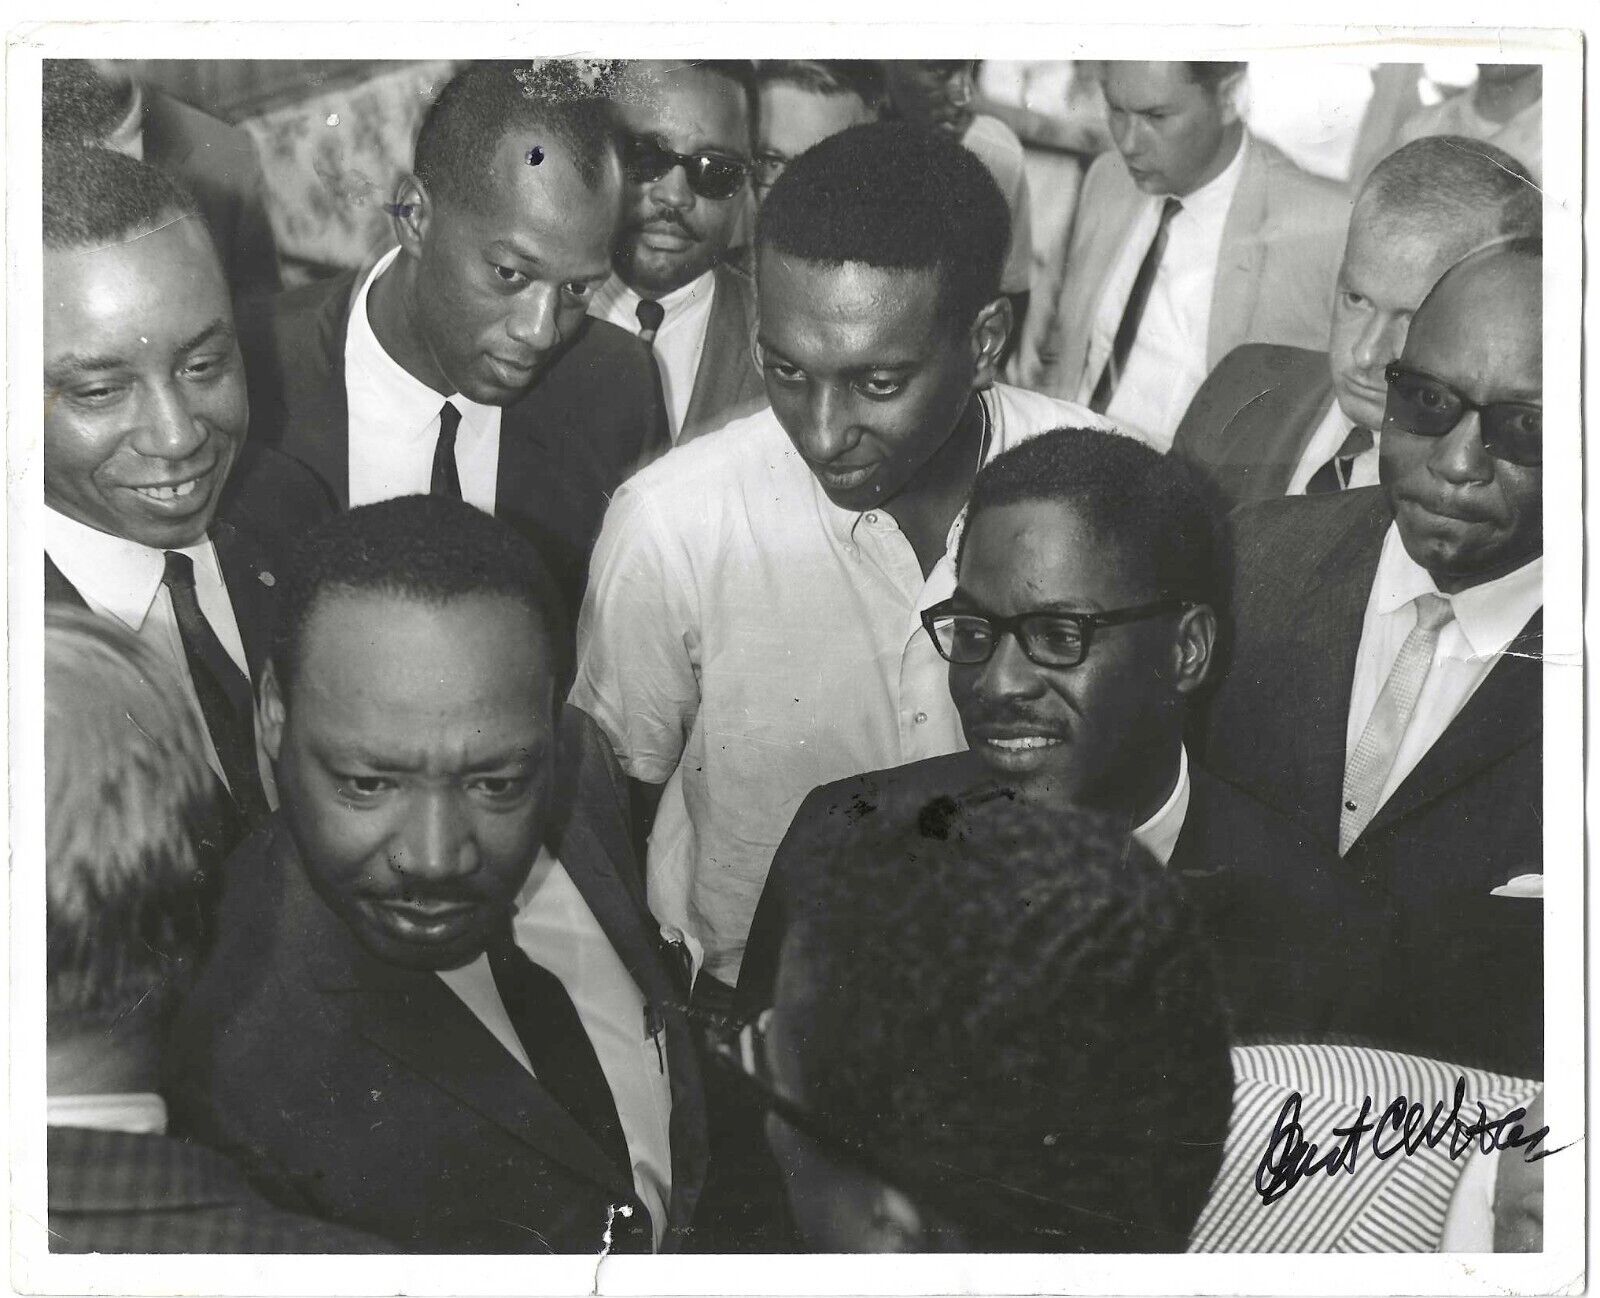 Martin Luther King Jr. And Supporters Photographed By Ernest C. Withers